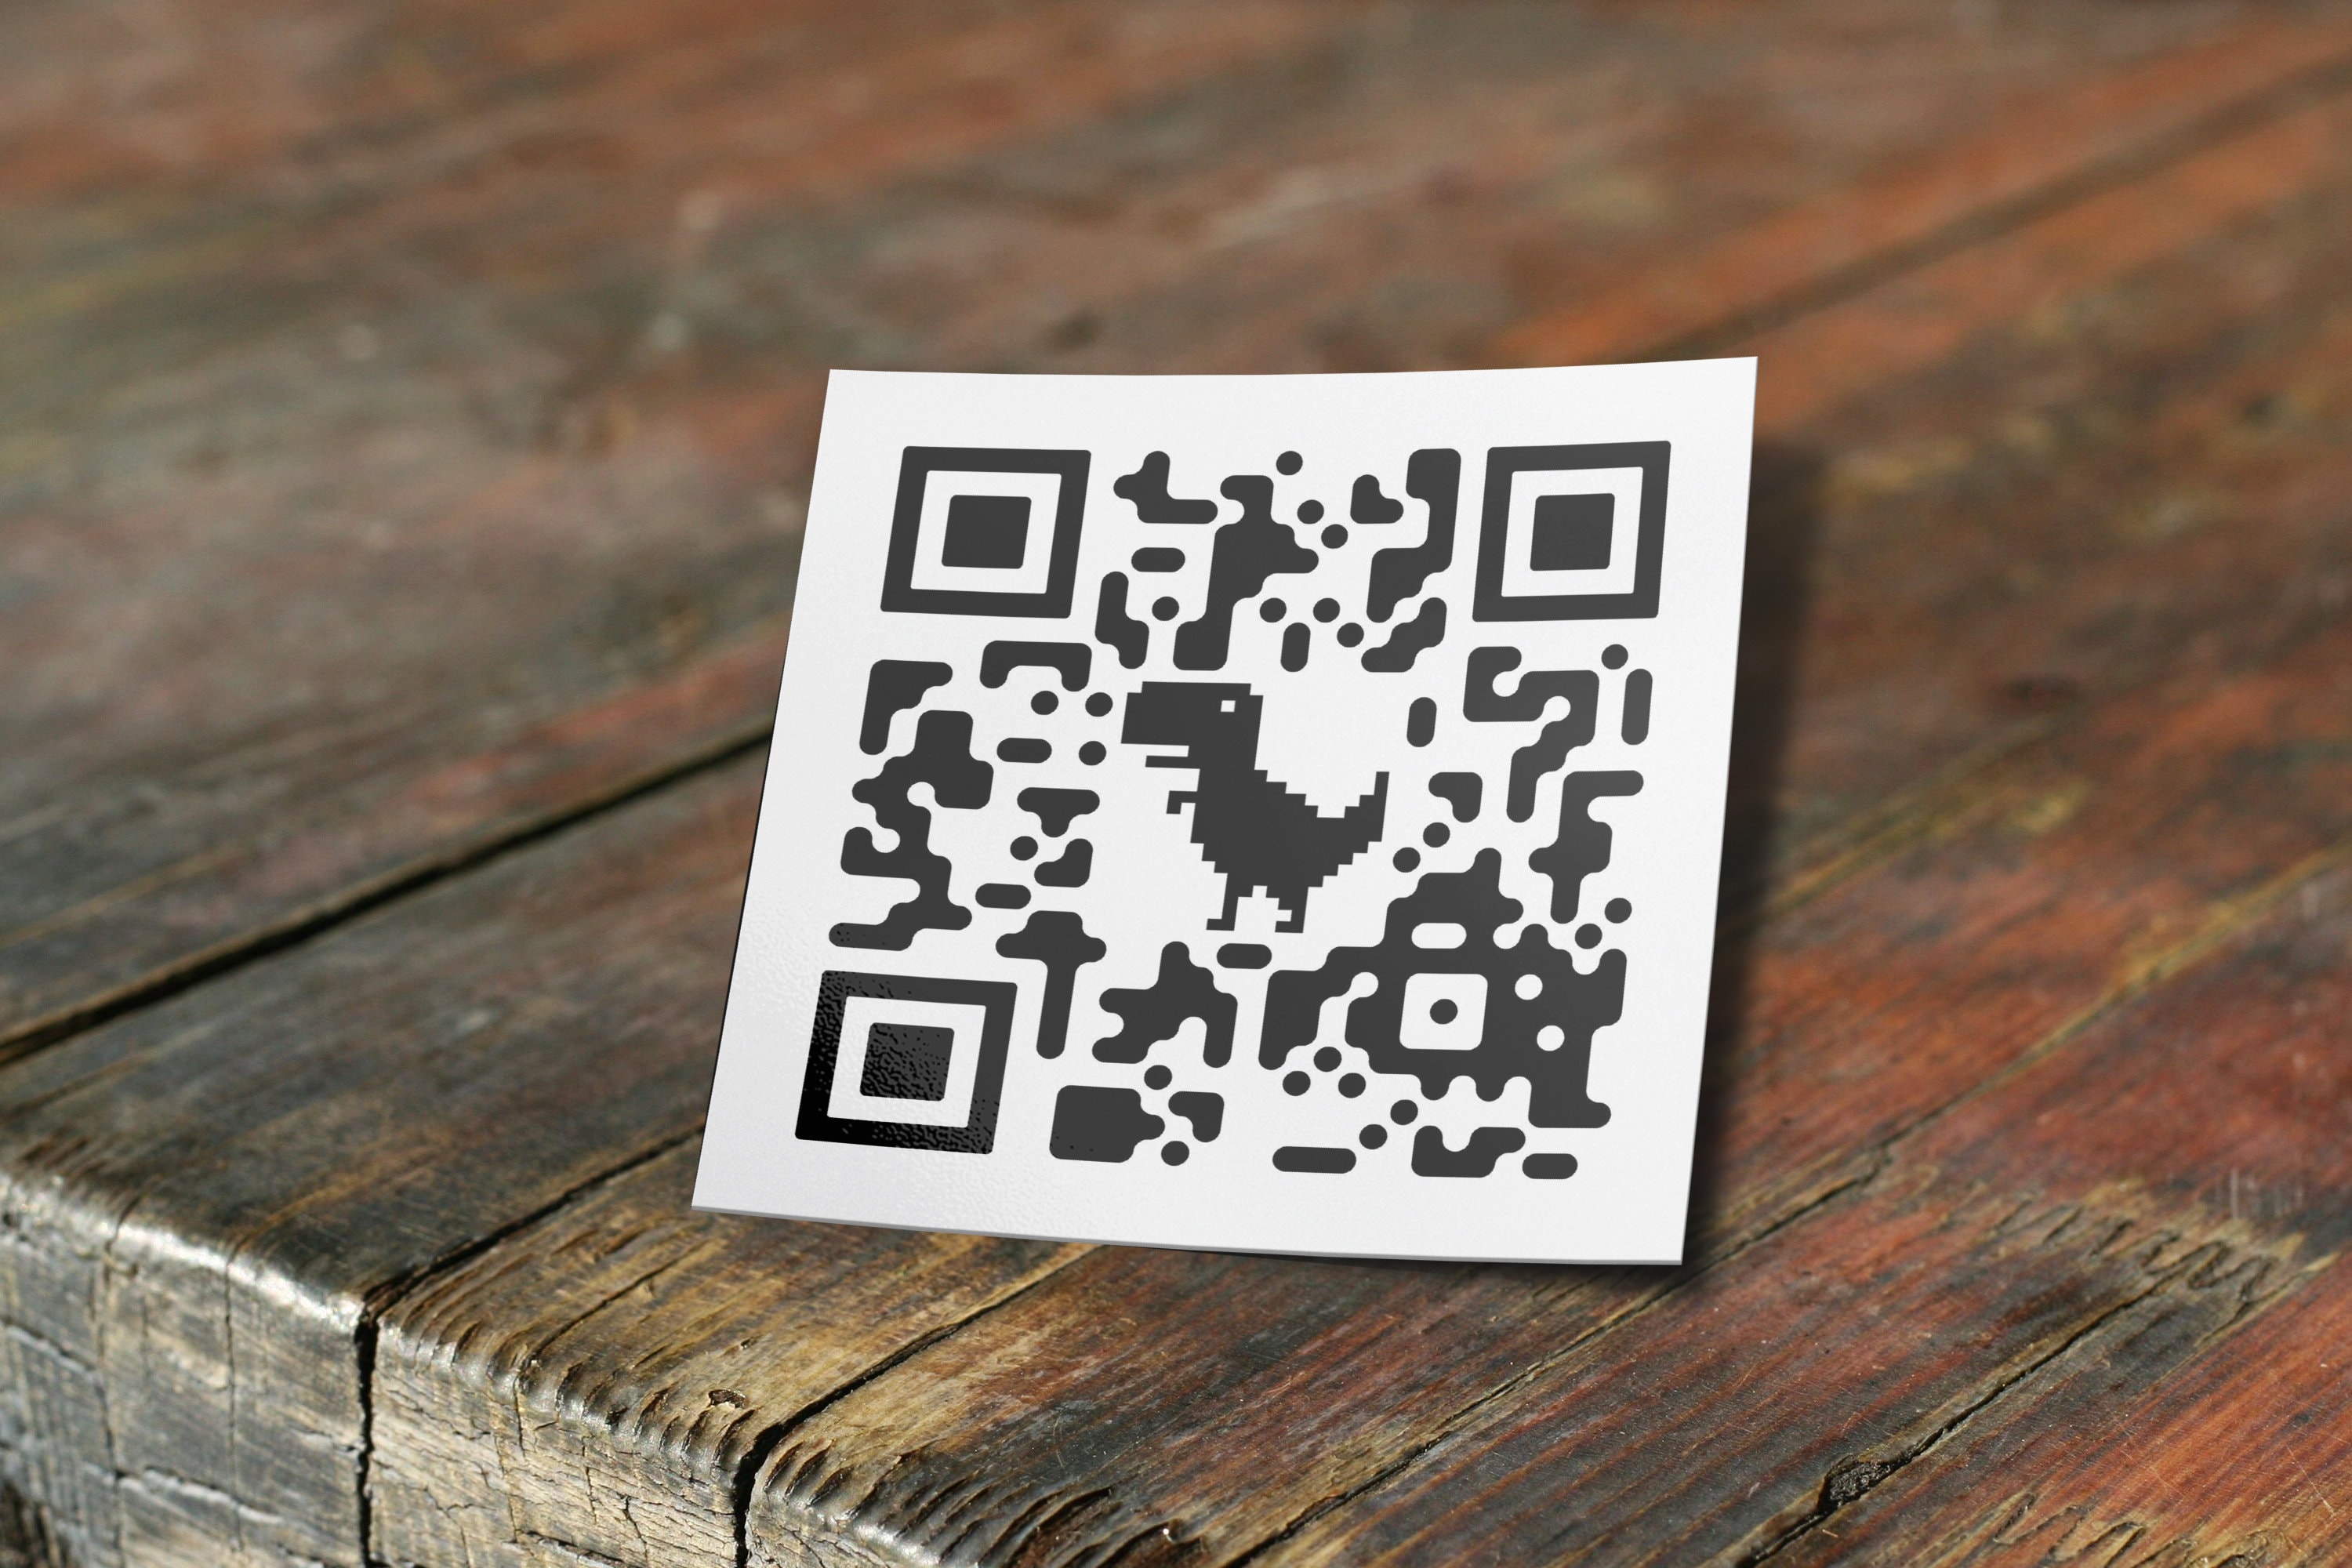 Rick Roll QR Code - Check Out My Onlyfans - Rick Astley - Sticker